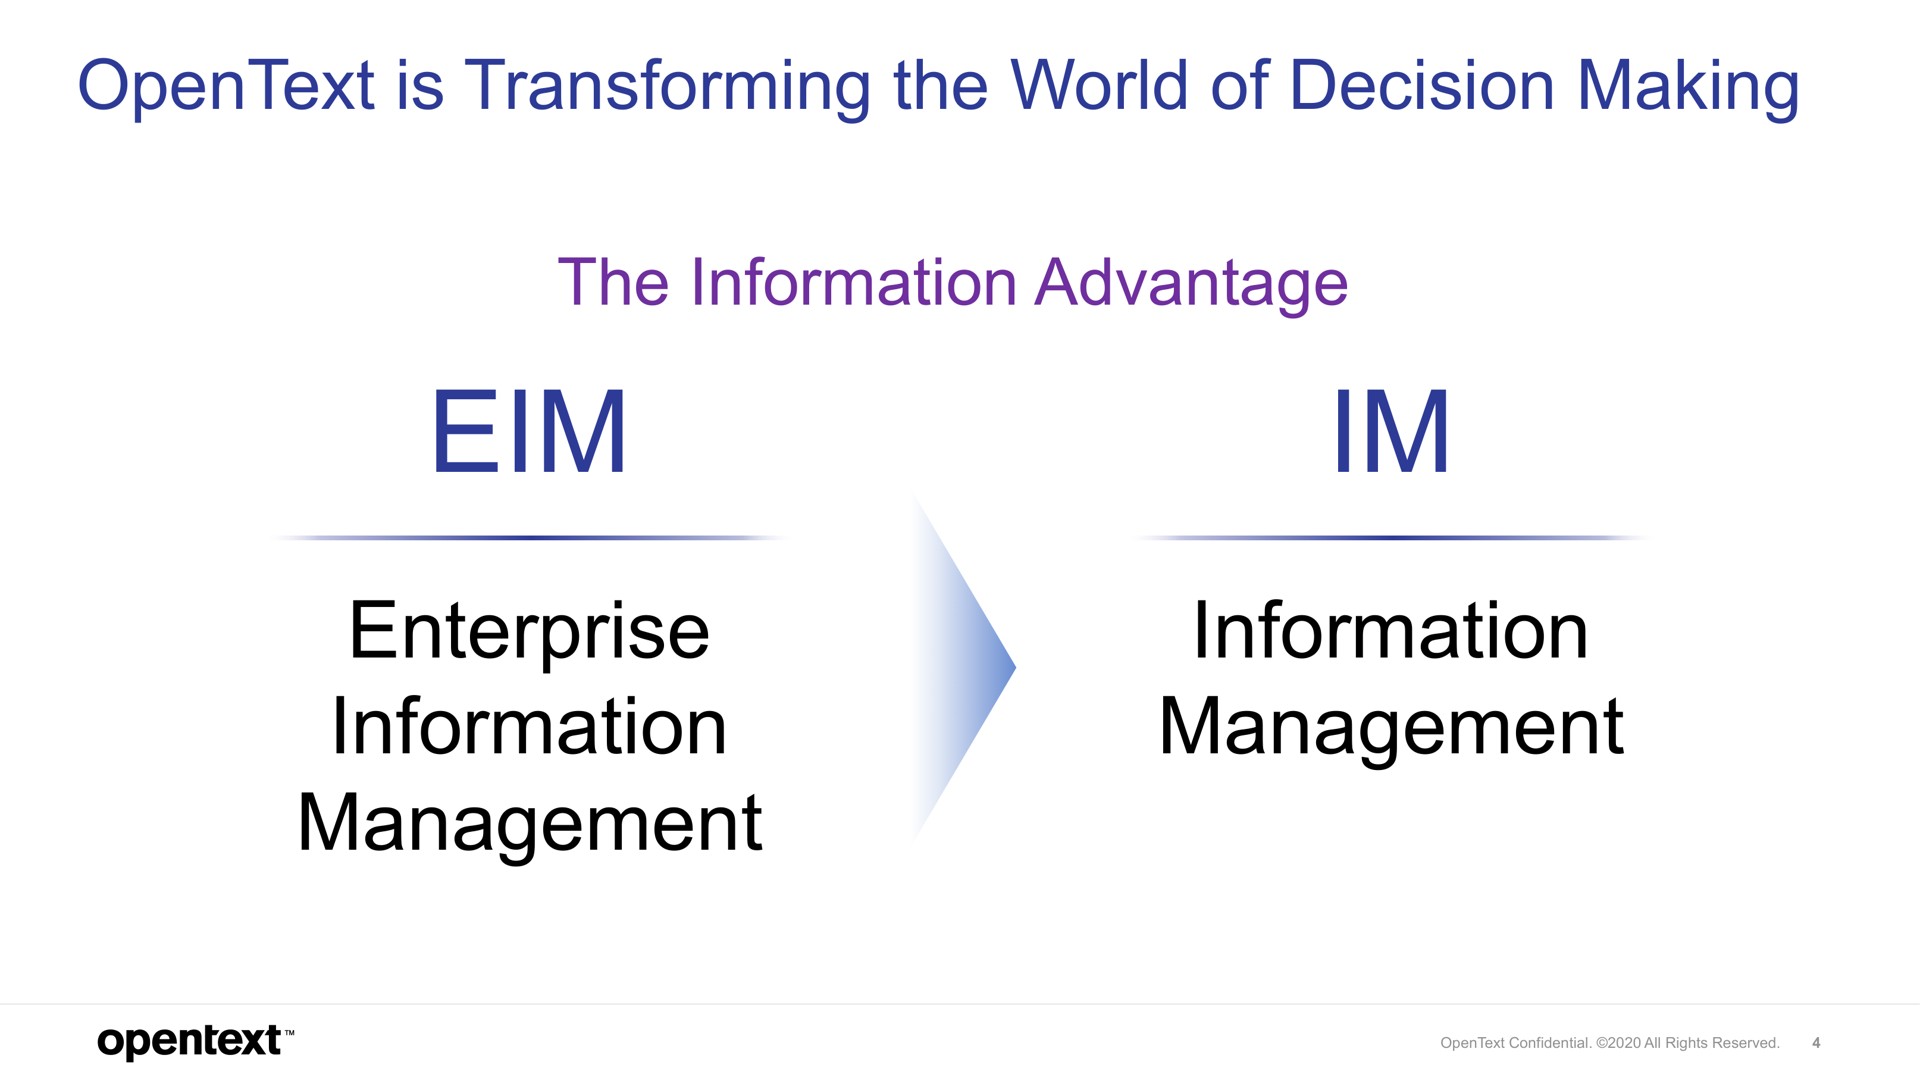 is transforming the world of decision making the information advantage enterprise information management information management | OpenText